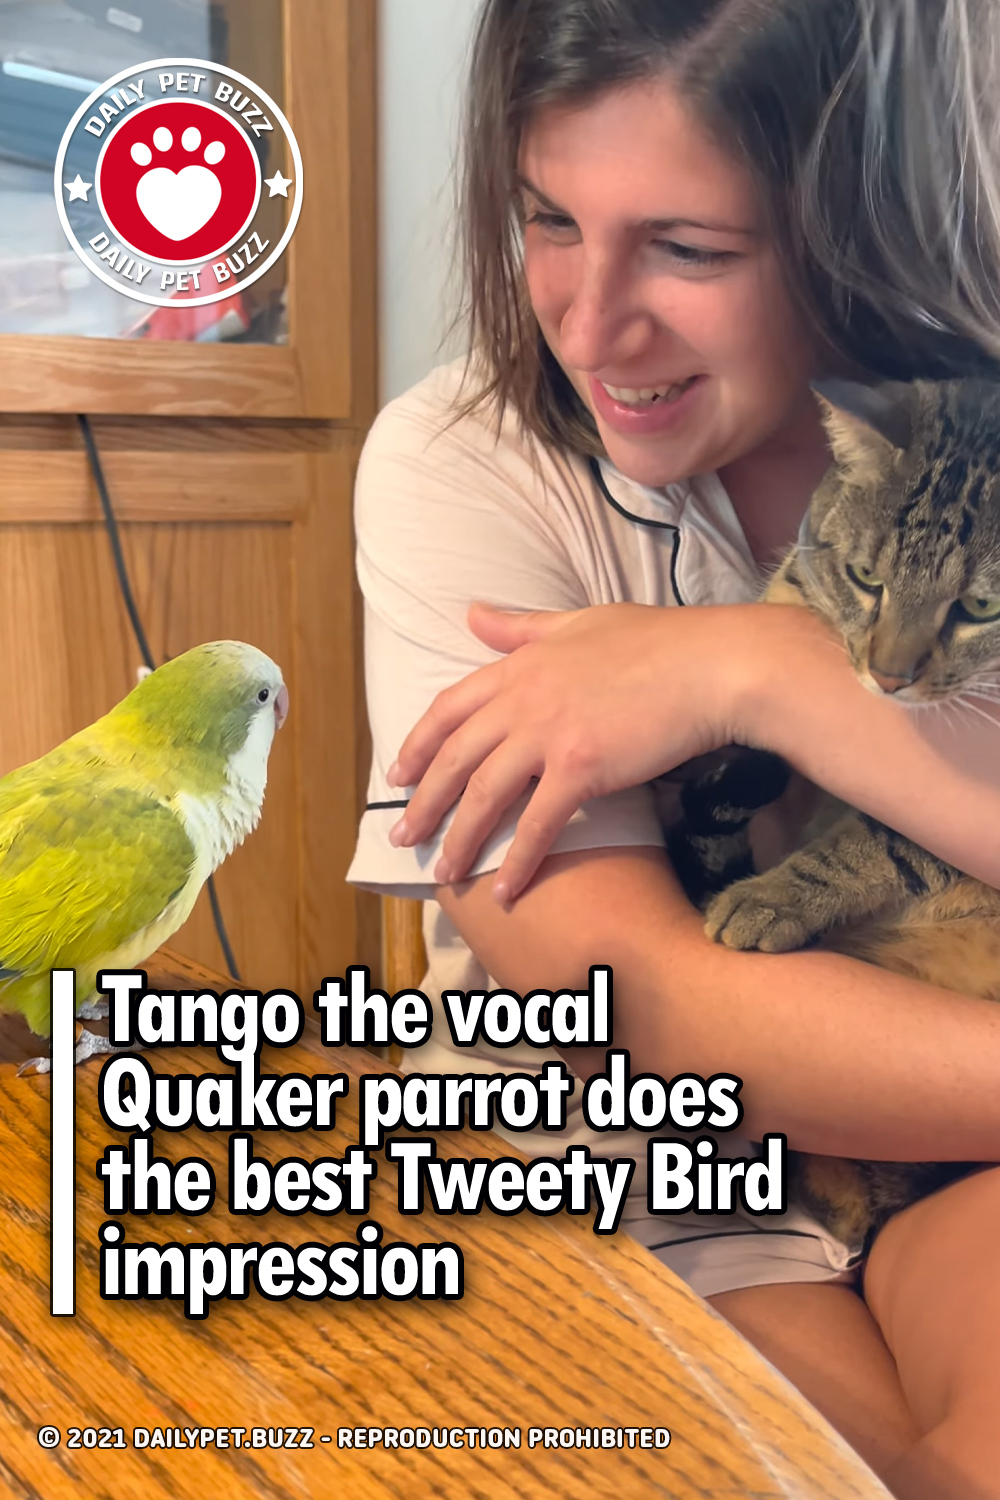 Tango the vocal Quaker parrot does the best Tweety Bird impression